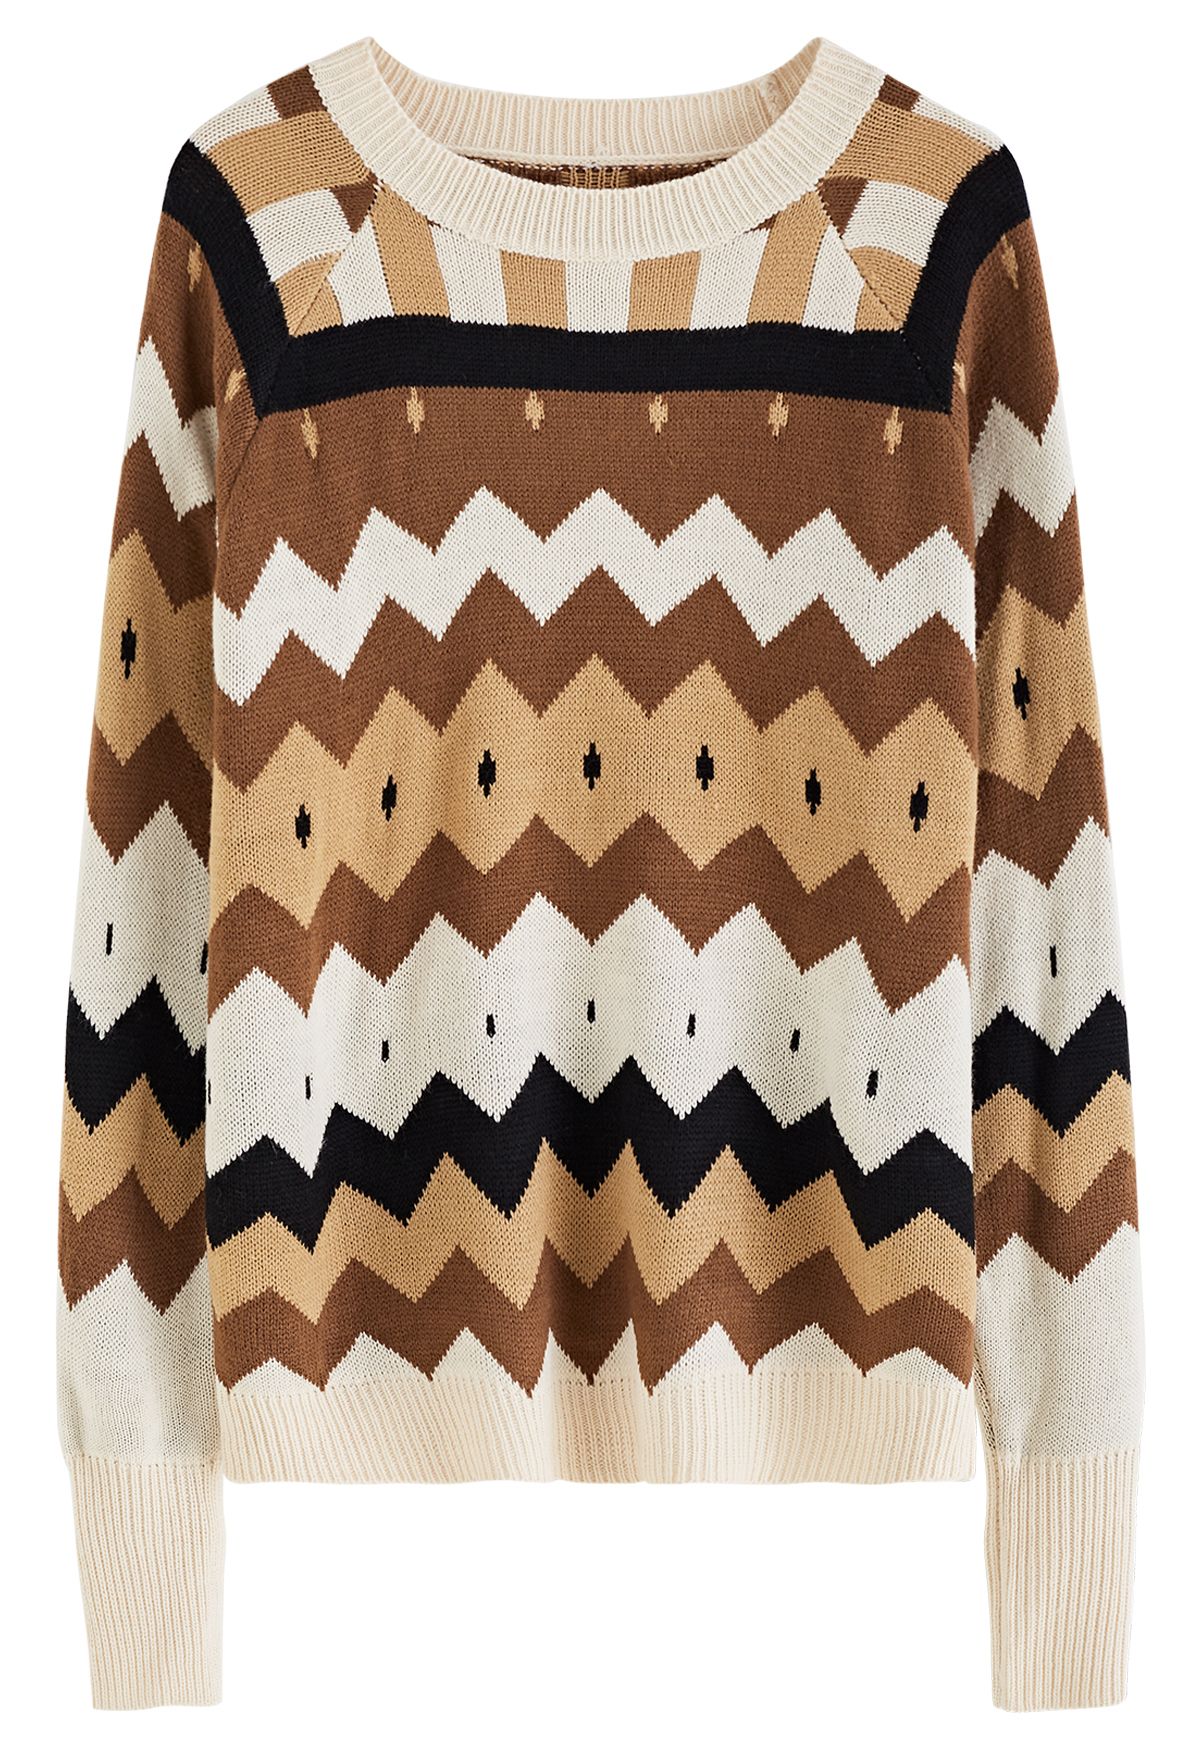 Multi-Color Zigzag Knit Sweater in Brown